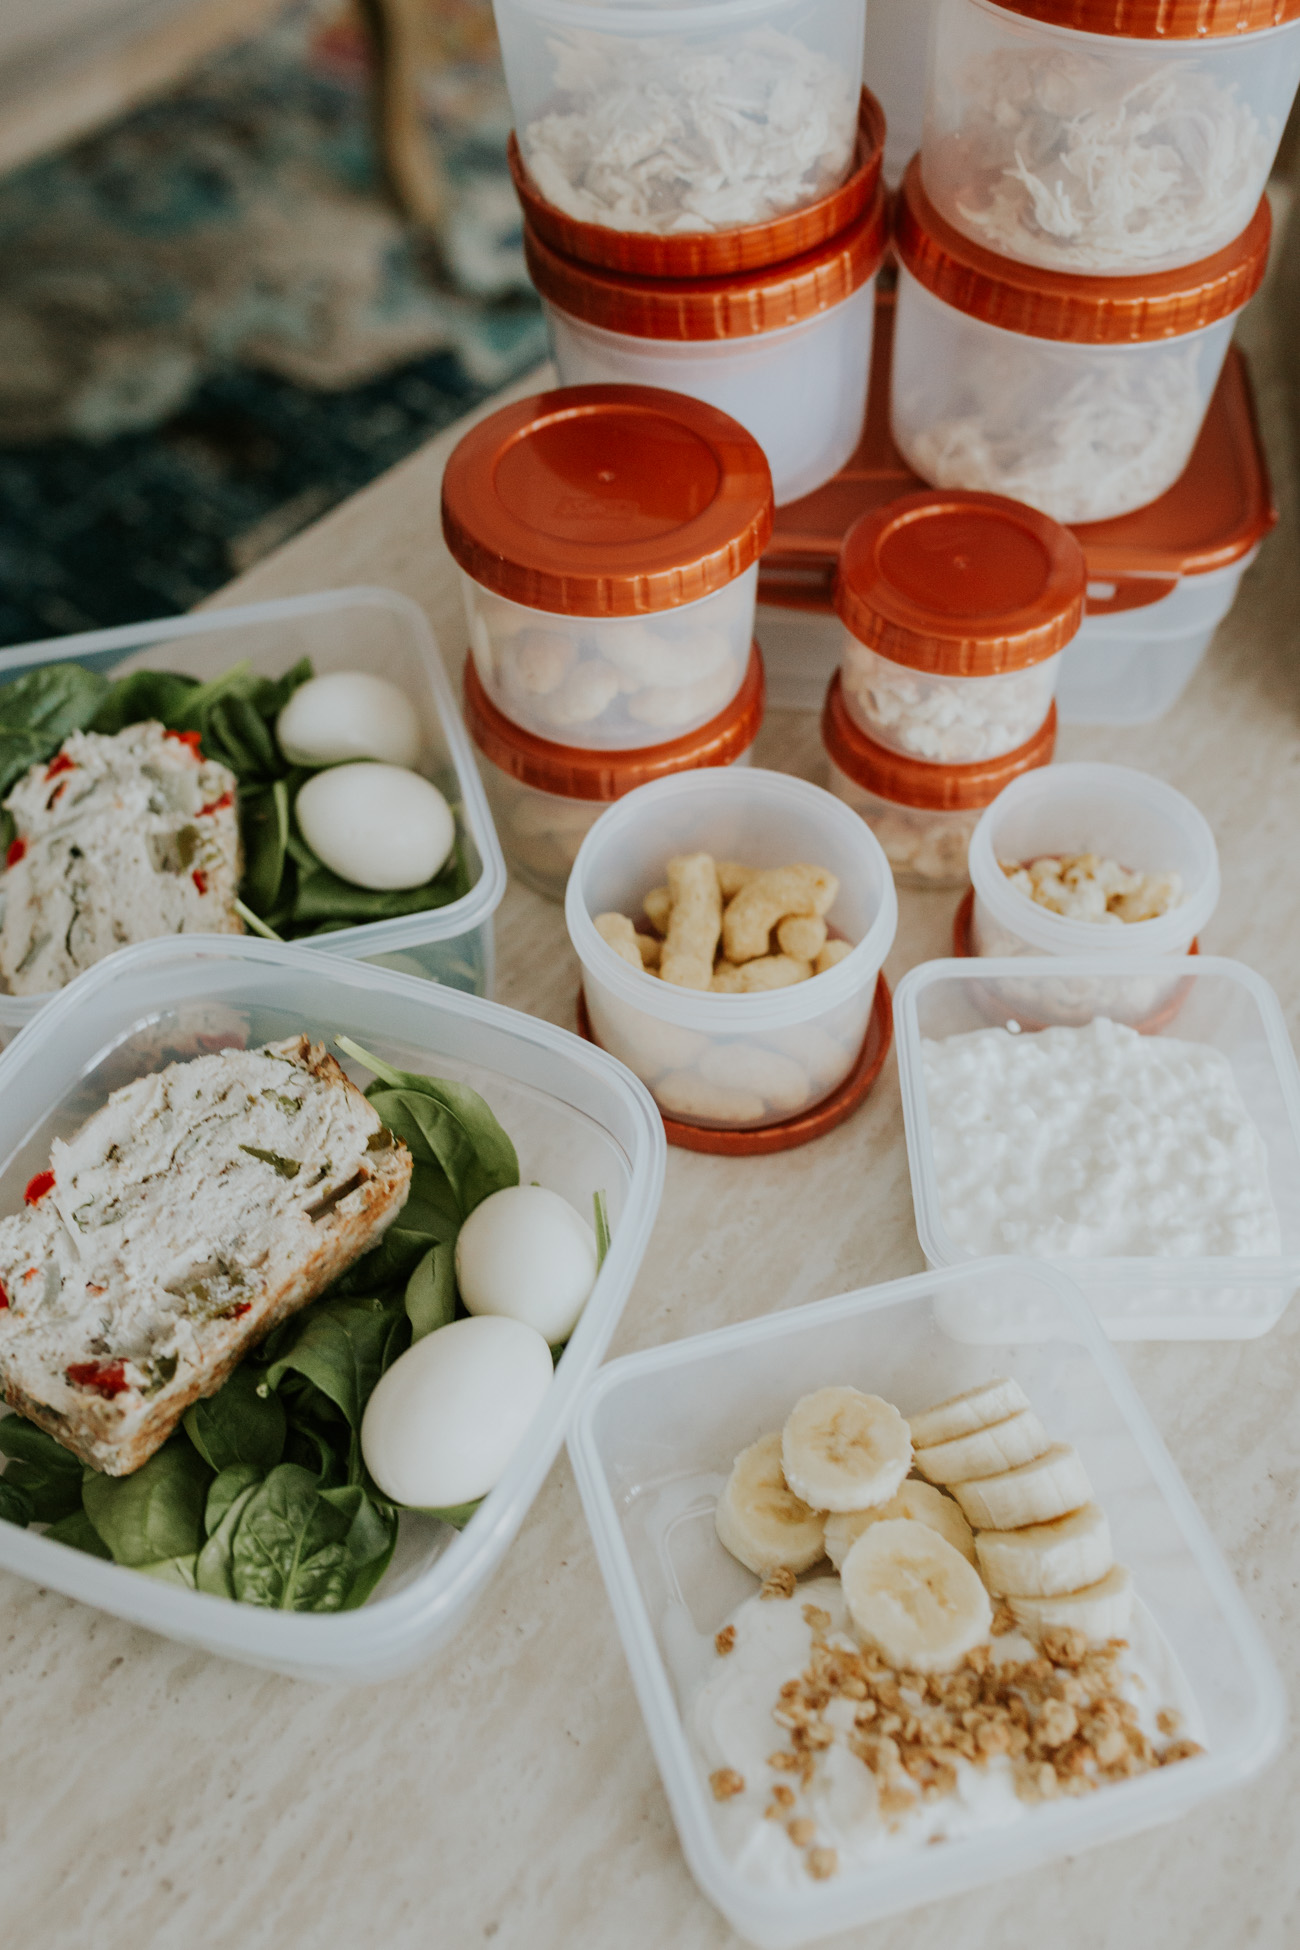 how to meal prep, meal prep containers, meal prep ideas, get fit for the new year, fitwithasd, protein powder, supplements, collagen powder, meal prep containters // grace white a southern drawl